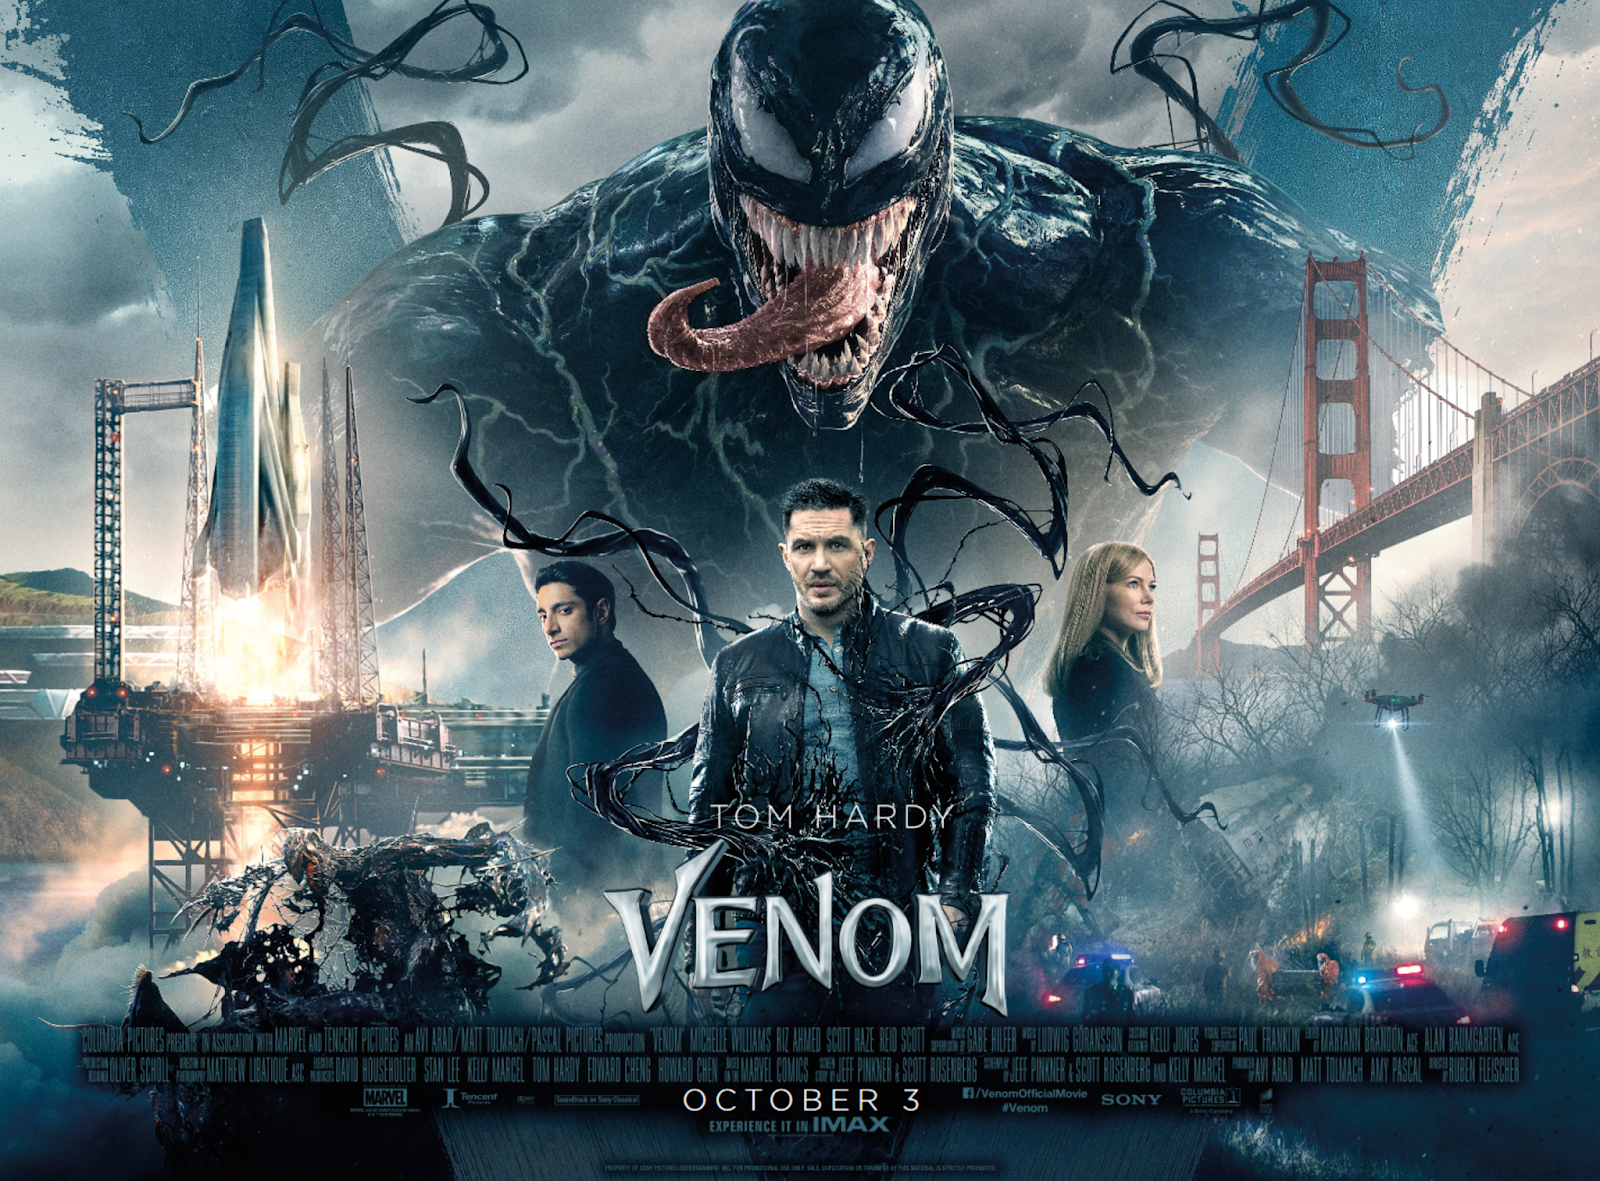 Venom 2 becomes the most anticipated sequel of 2021 in the United States